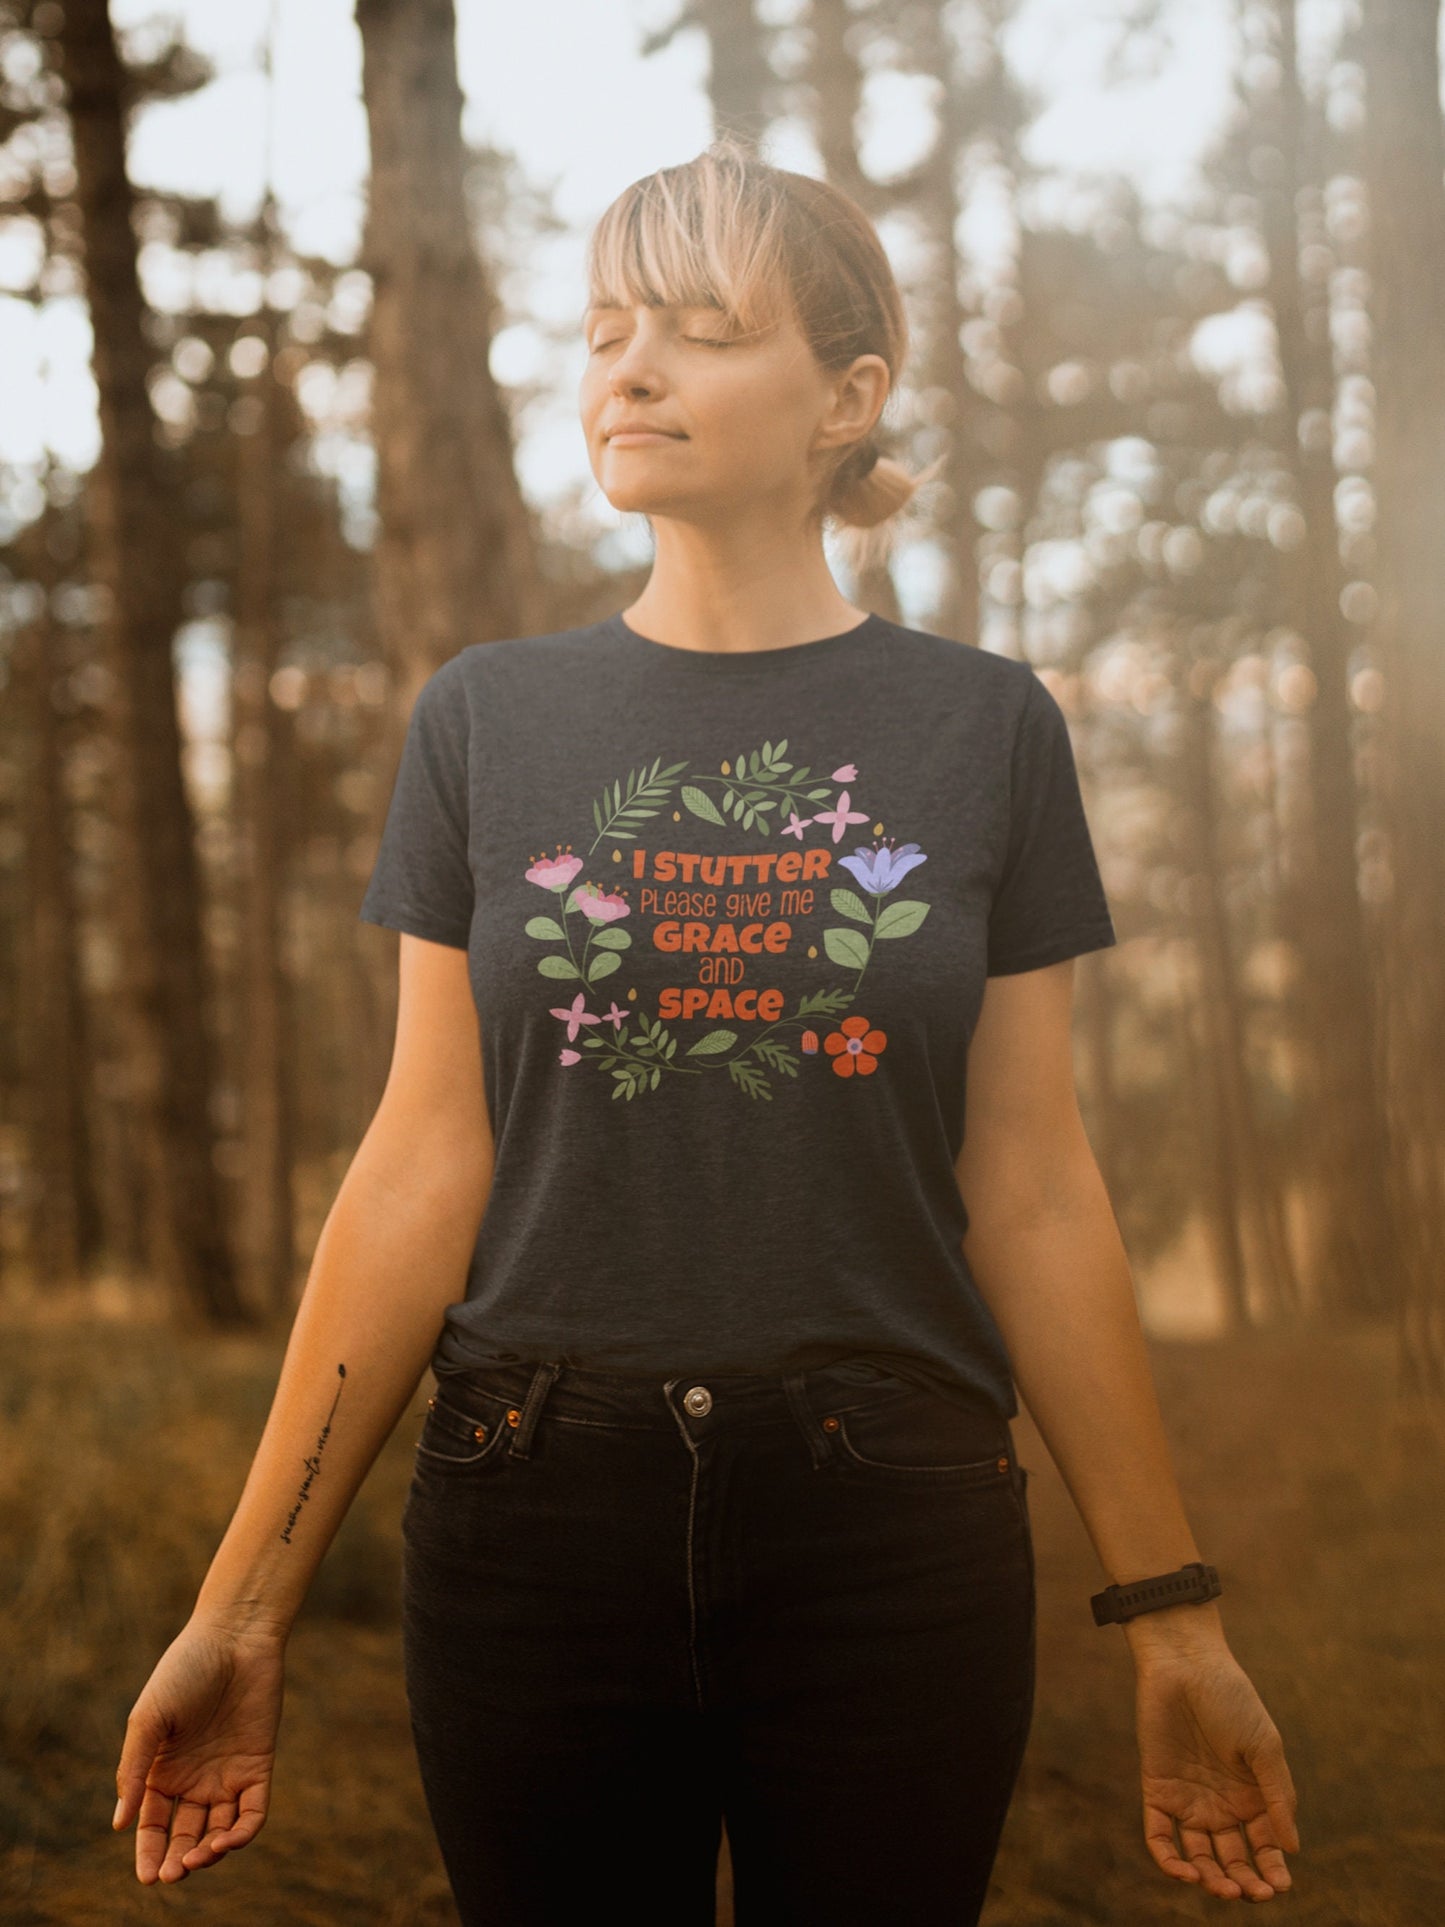 I Stutter, Please Give be Grace and Space Floral T-shirt